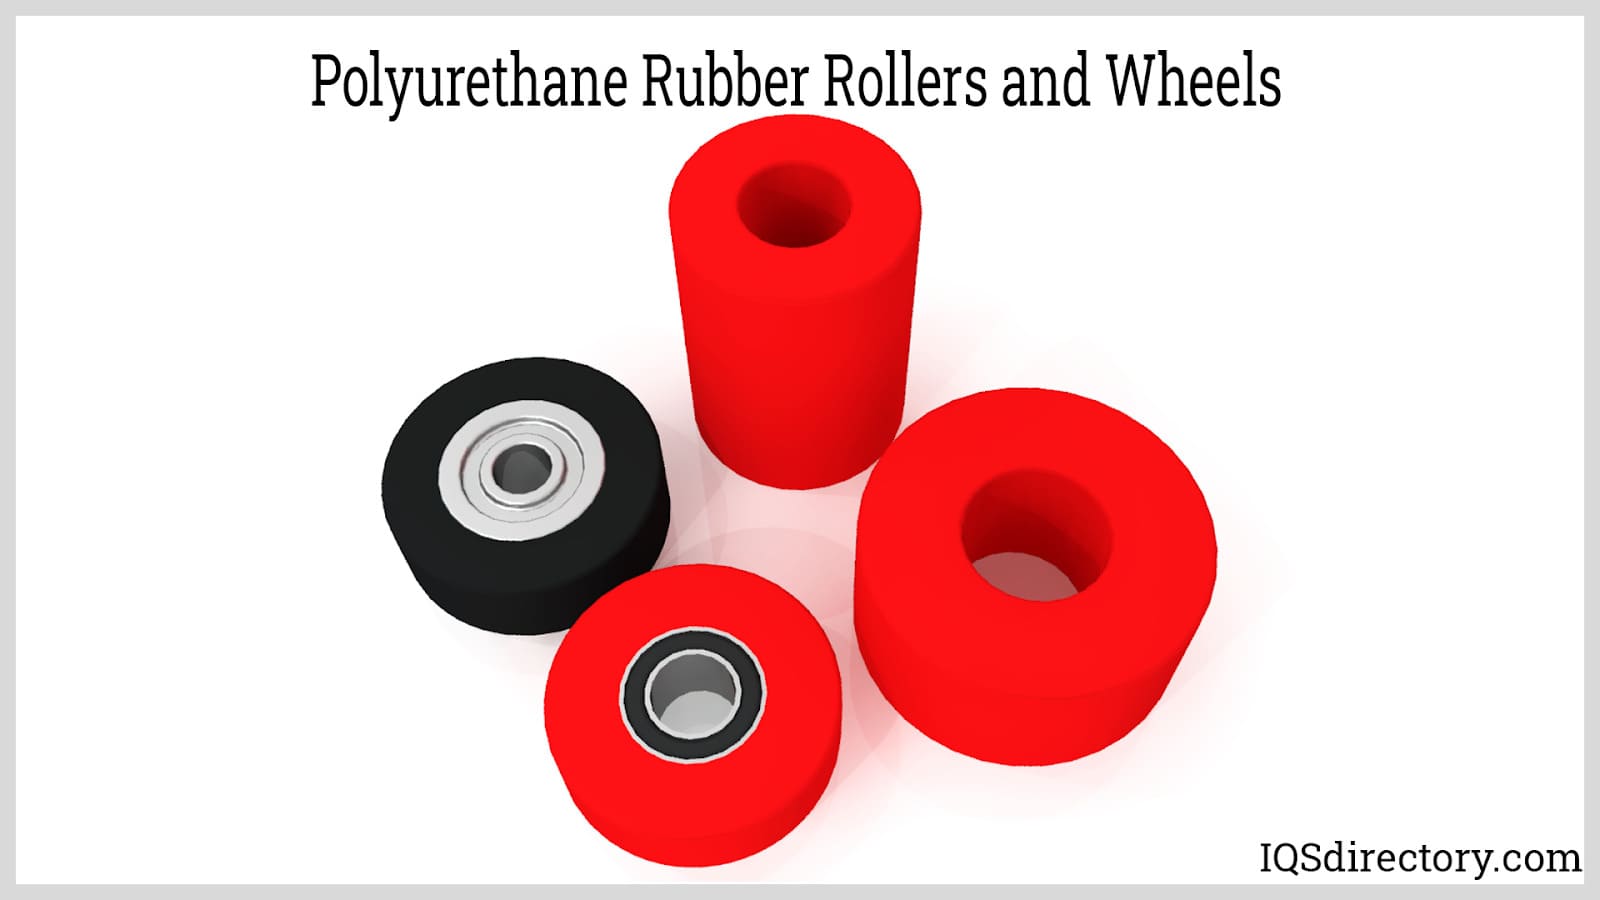 Industrial Rubber Roller Grooving Services